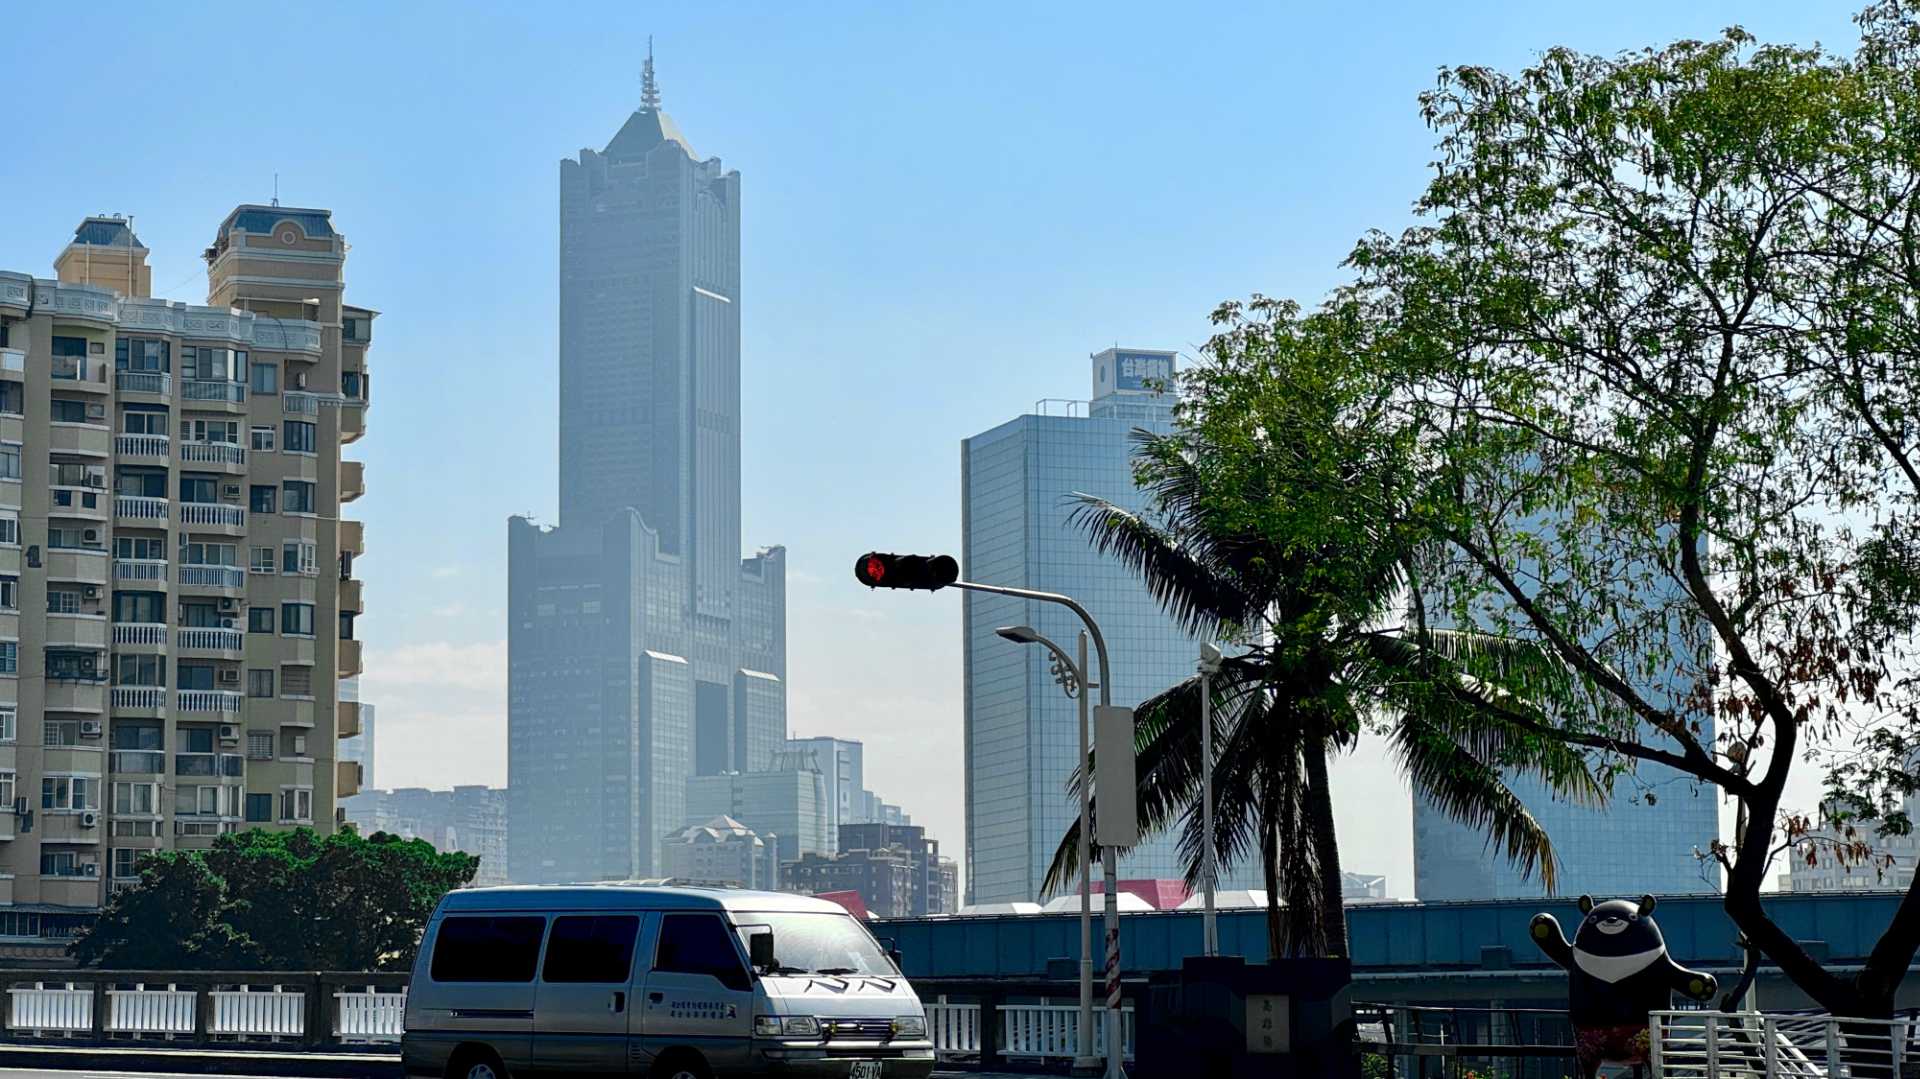 85 Sky Tower, an unconventional 85-floor skyscraper with a hollow central core, viewed in the distance across a bridge over Love River, Kaohsiung.